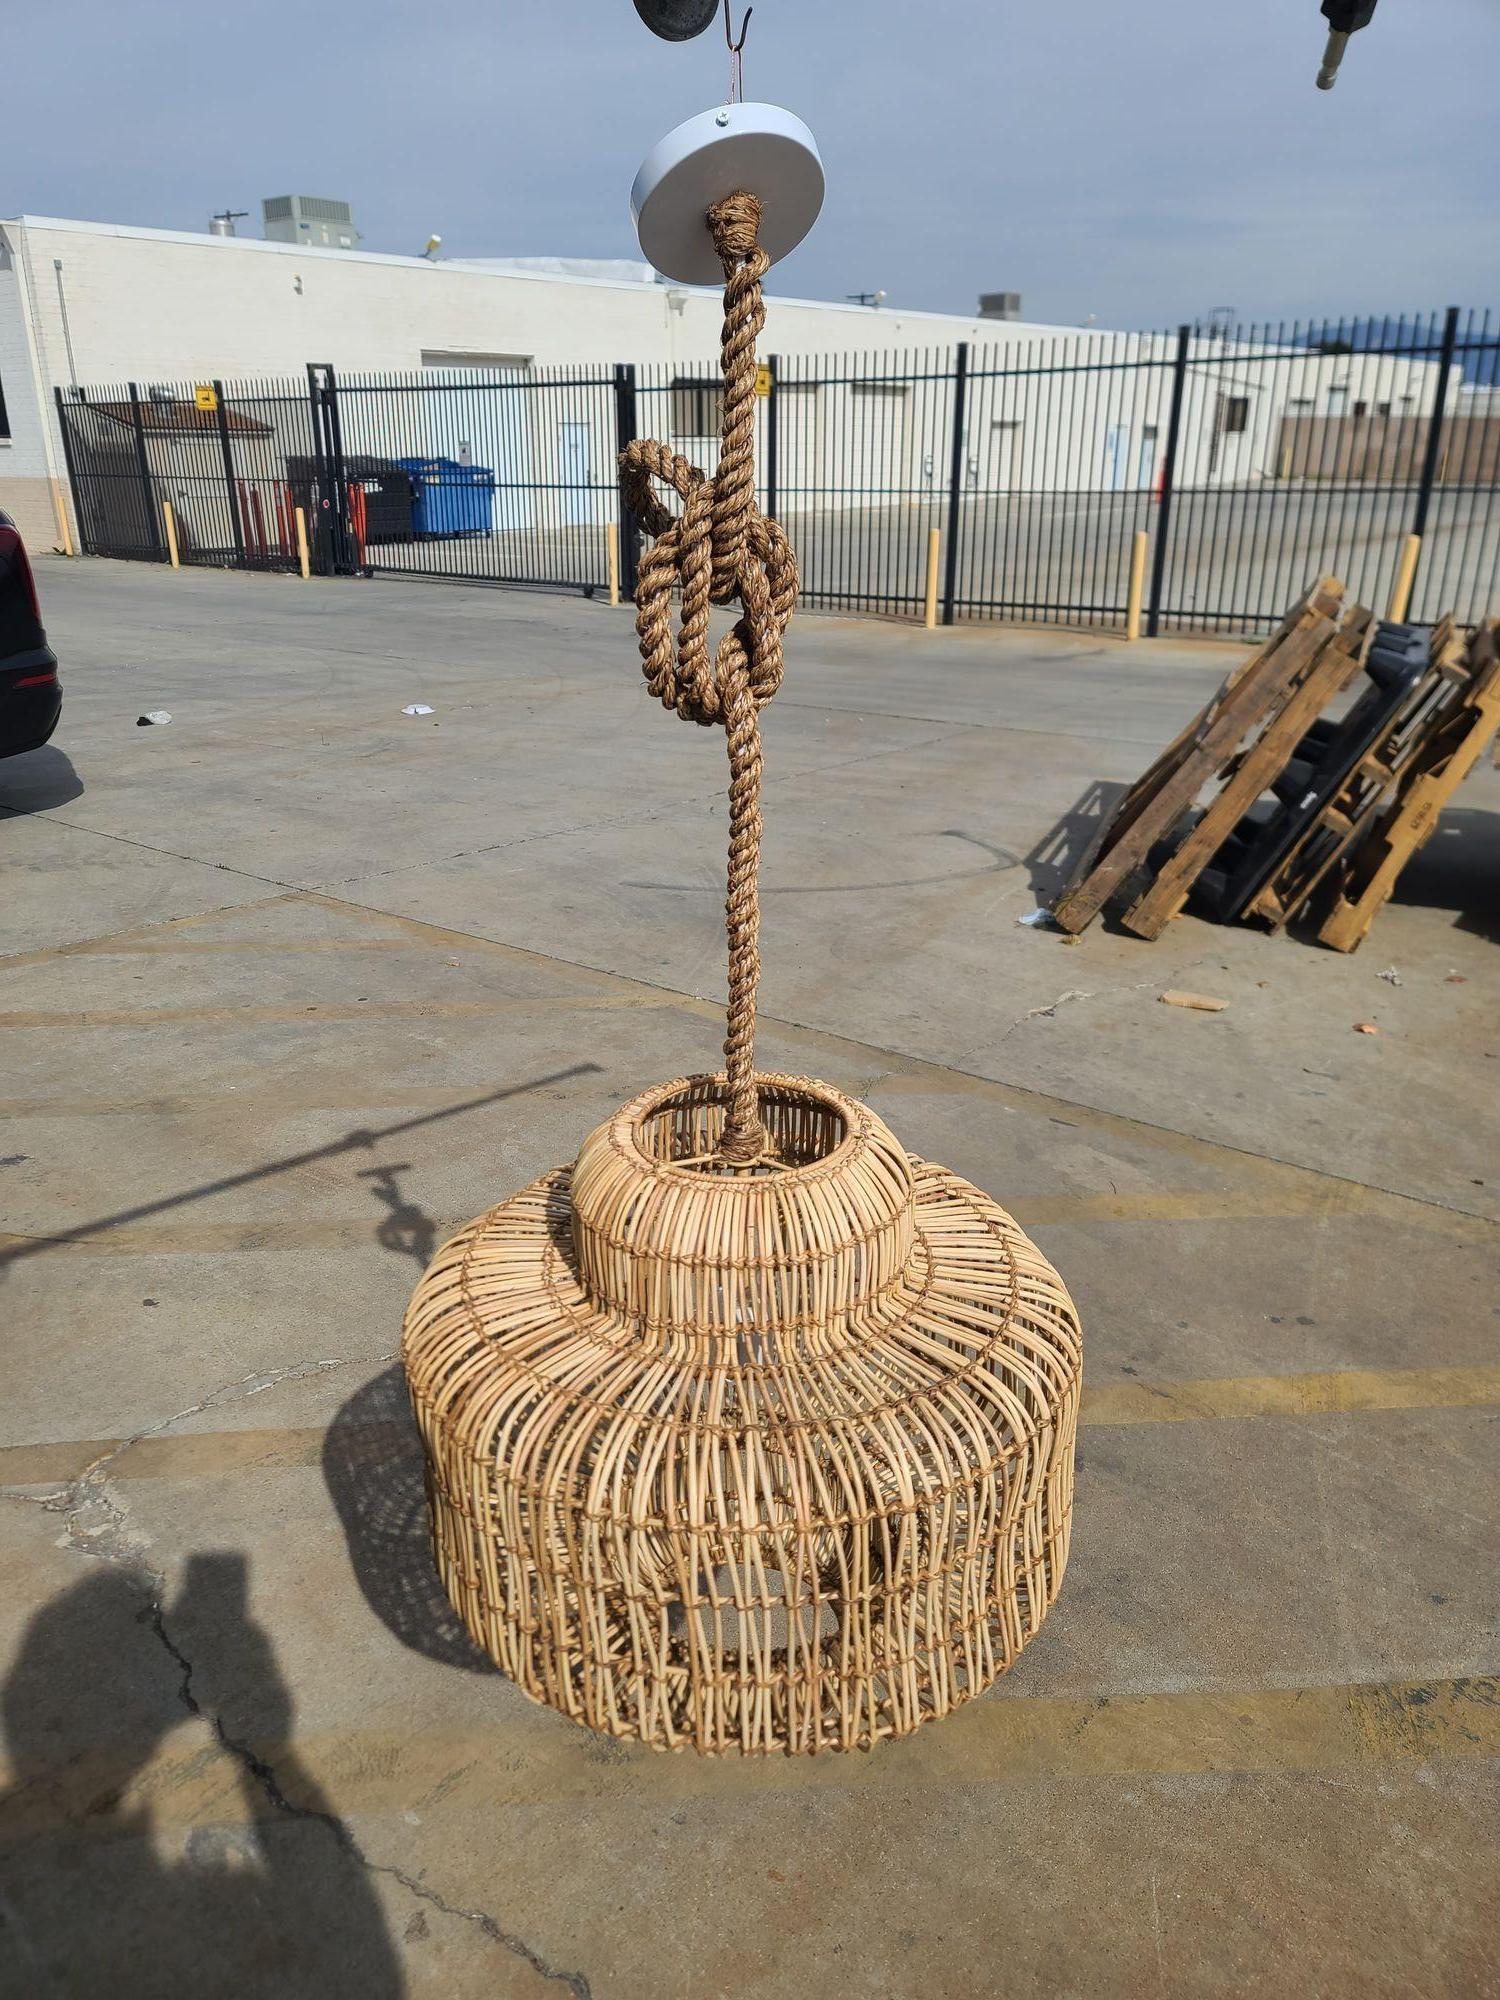 Original near-mint 1990s woven hanging ceiling lamp pendant with raw rust looks perfect to add a little warmth to a loft or modern house. The pendant features a raw woven stick rattan pendant light hung from a bamboo cloth-wrapped cord connected to